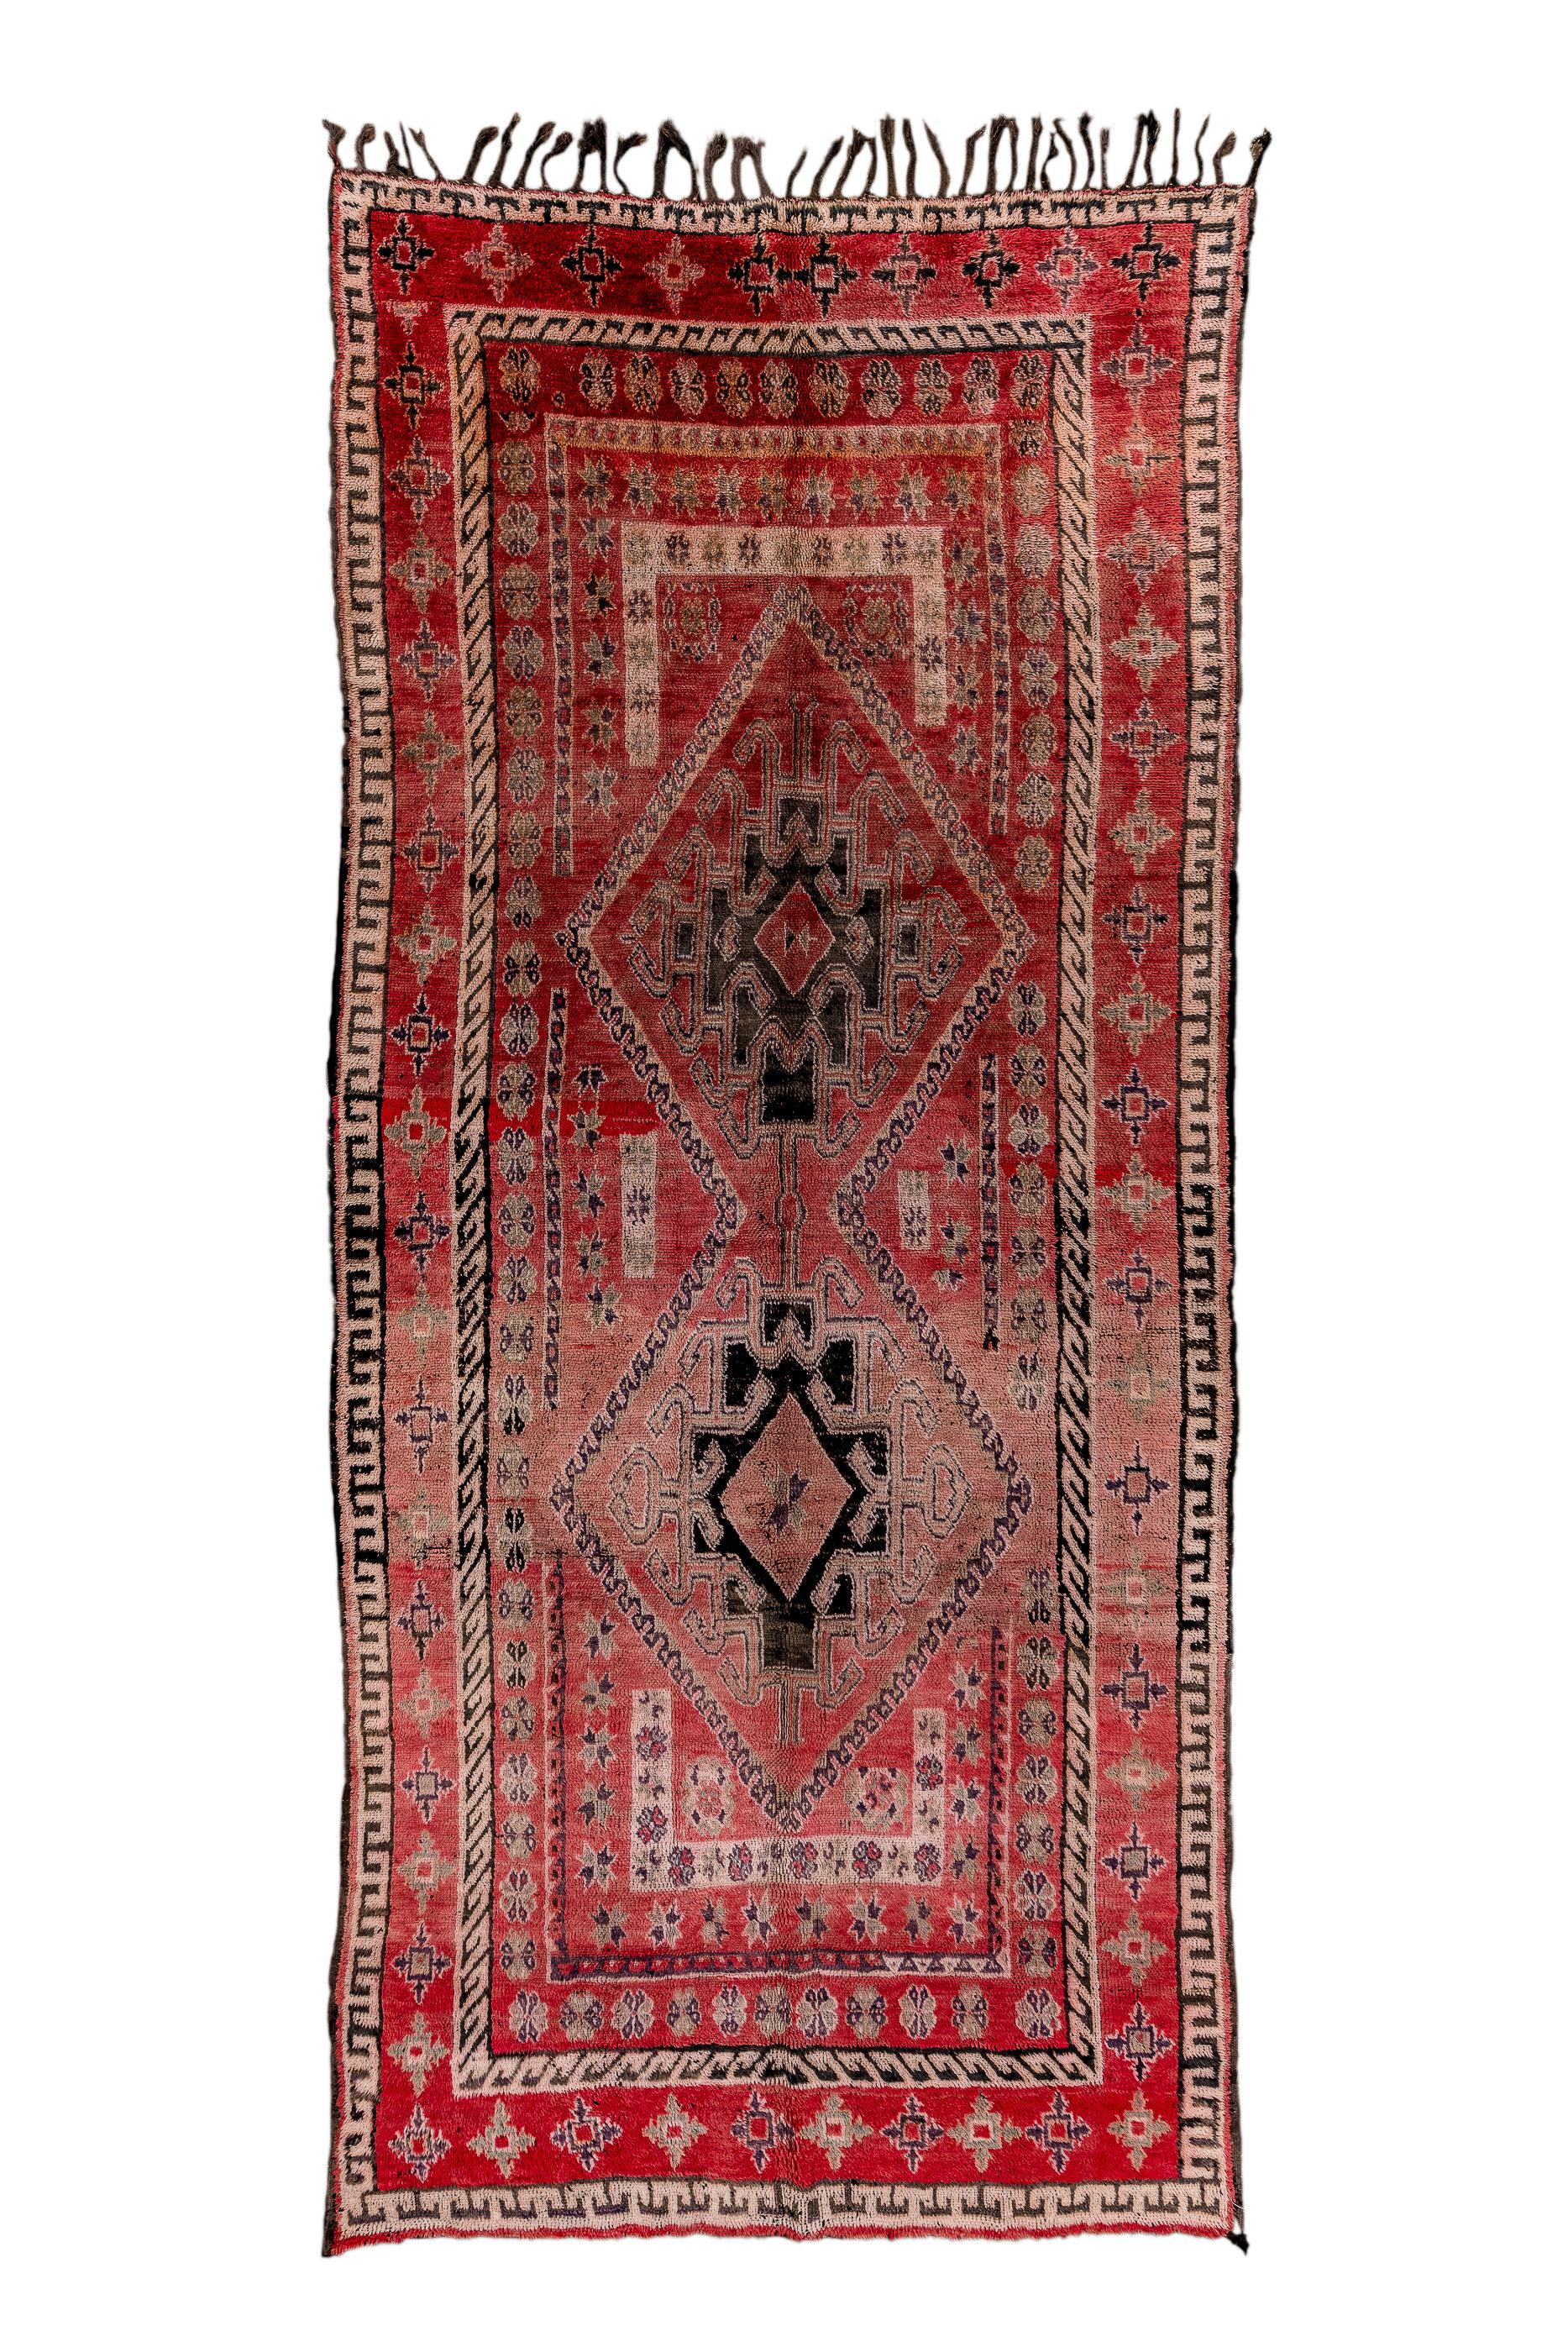 This lowland Moroccan kellegi (long carpet) partakes slightly in a Southwest Persian aesthetic with two conjoint rust lozenges, each containing a version of the “Qashghai gul”, all on the rust field. An ecru bracket at each field end positions the